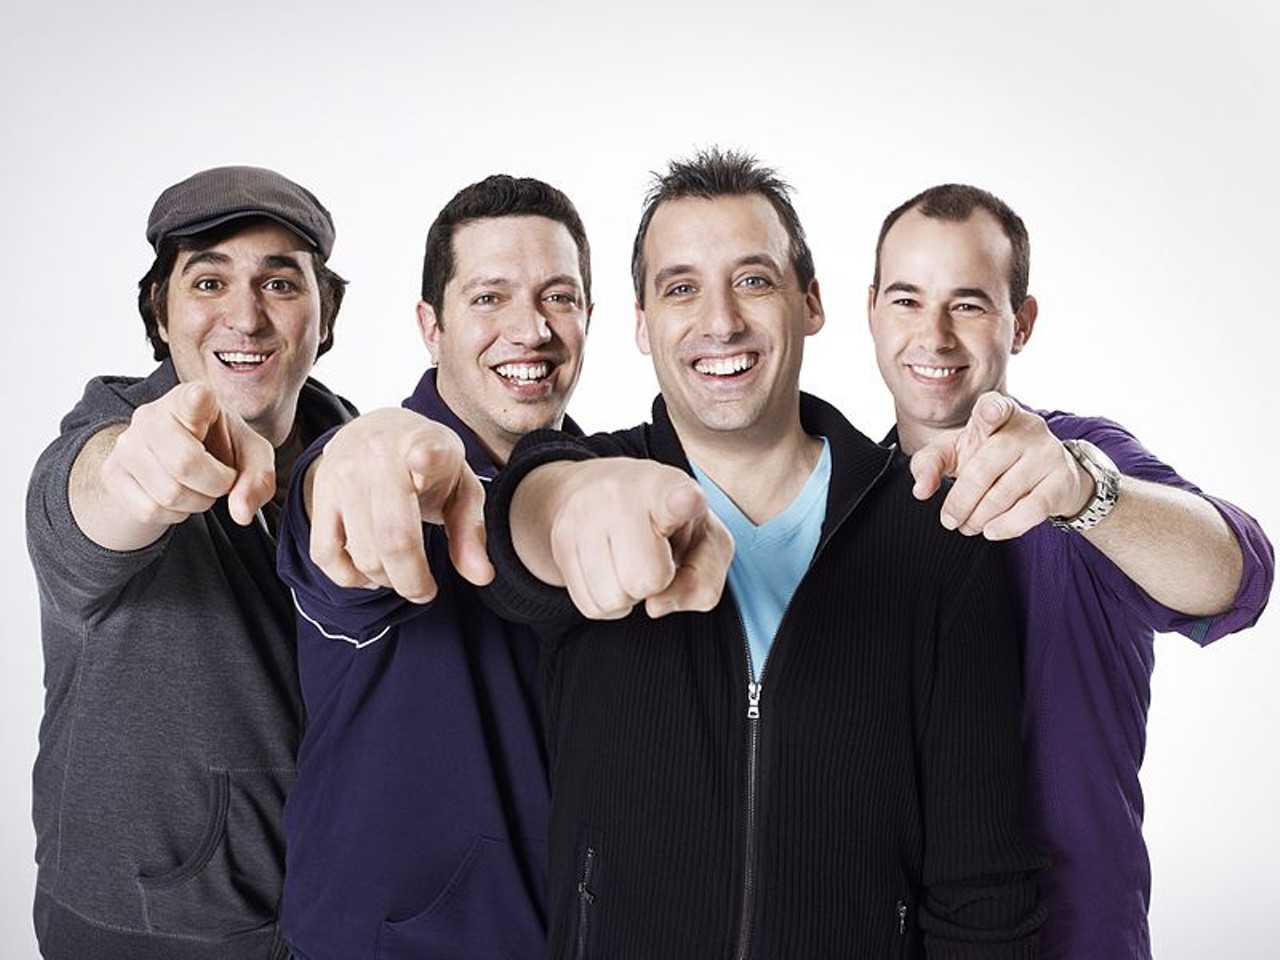 Impractical Jokers
2/21 at the Royal Oak Music Theatre, Royal Oak
The stars of TruTV’s hidden camera show will be in Royal Oak, probably making fun of as many people as possible. Sounds like a blast.